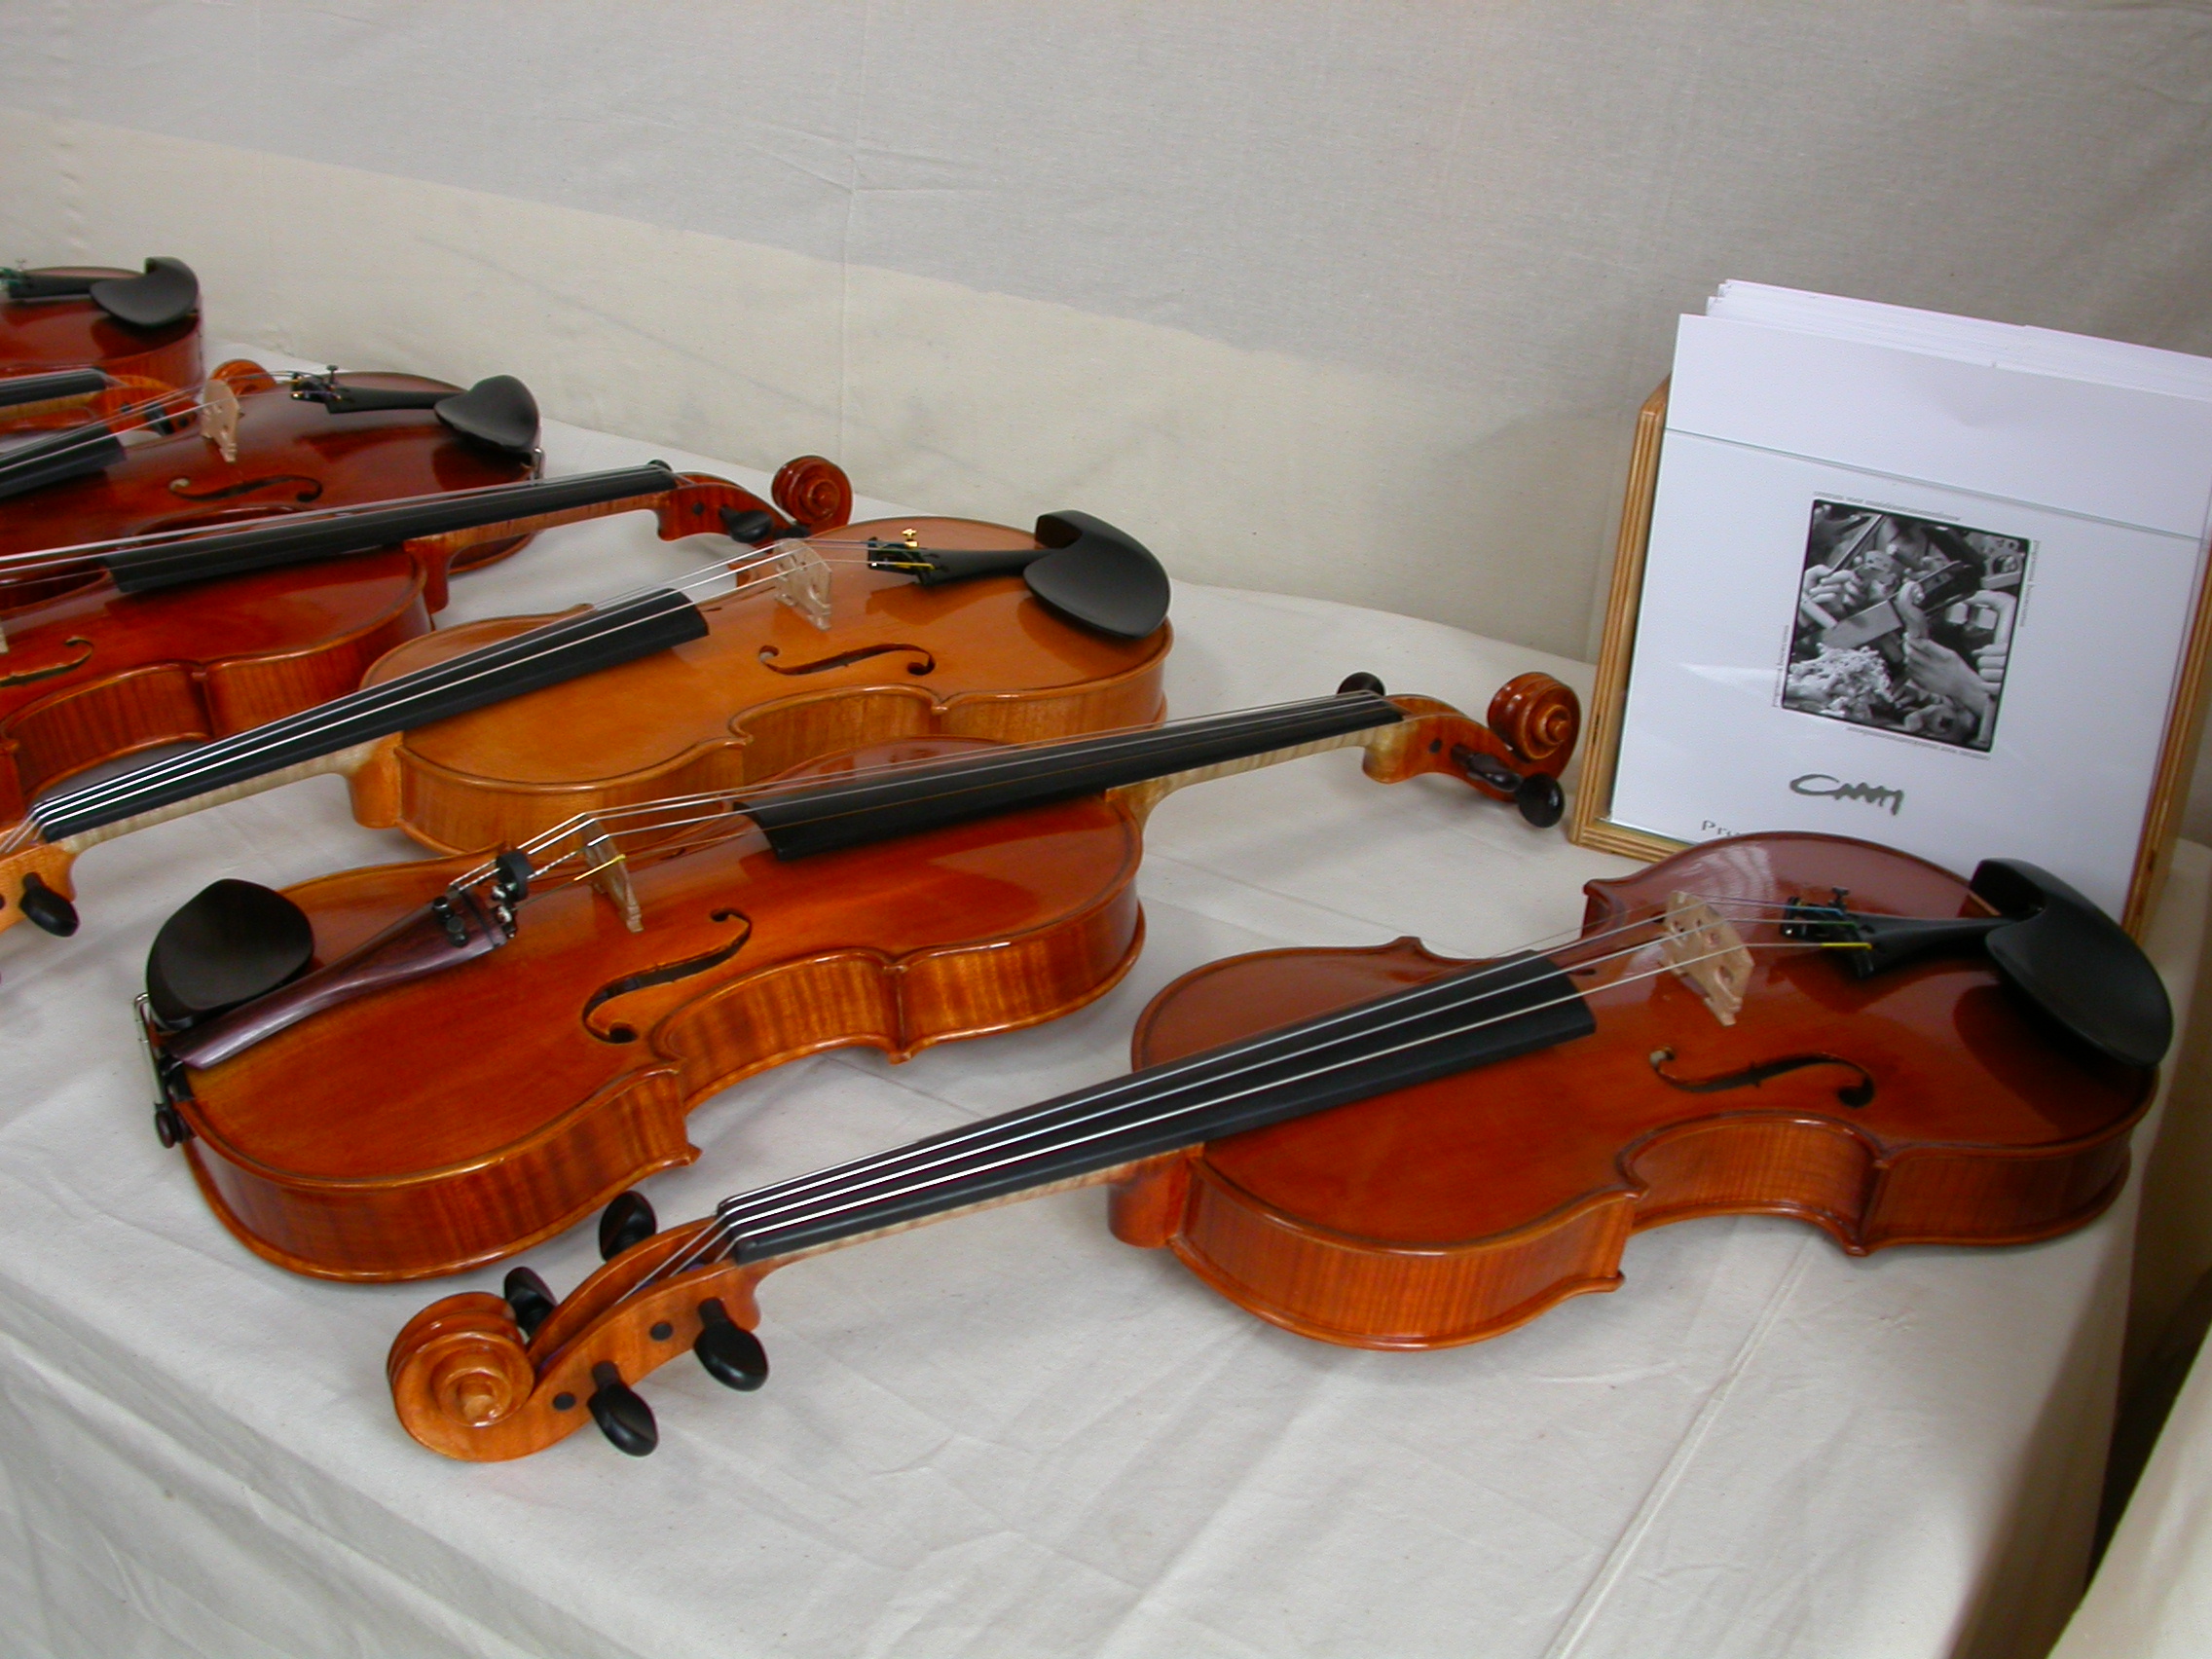 paul violins at the instrument making school craft crafting music